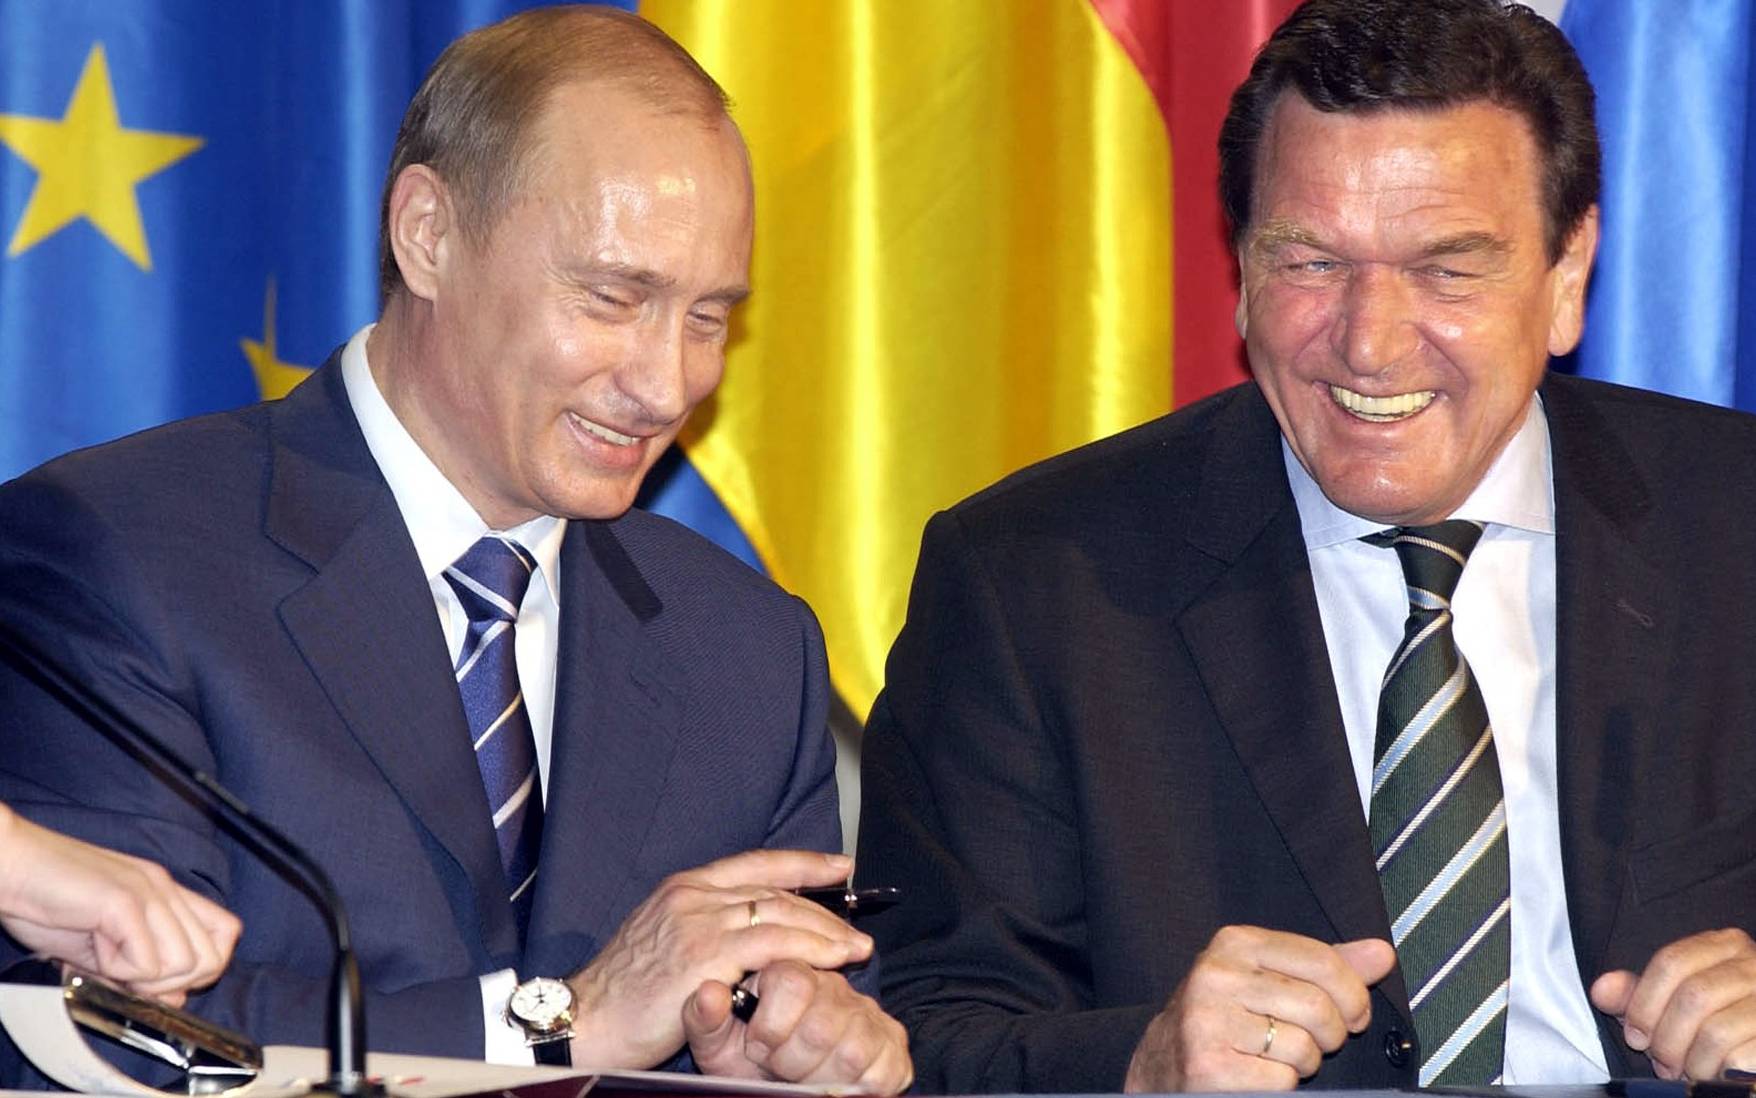 German Chancellor Gerhard Schroeder (R) and Russian President Vladimir Putin smile during a signing ceremony in Hanover, 11 April 2005. Vladimir Putin tried to reassure jittery foreign investors that his government had no plans to reverse controversial privatisations during the opening of the Hannover fair, one of the world's biggest trade fairs. AFP PHOTO / ITAR-TASS / PRESIDENTIAL PRESS SERVICE




. (Photo by SERGEI ZHUKOV / TASS / AFP)